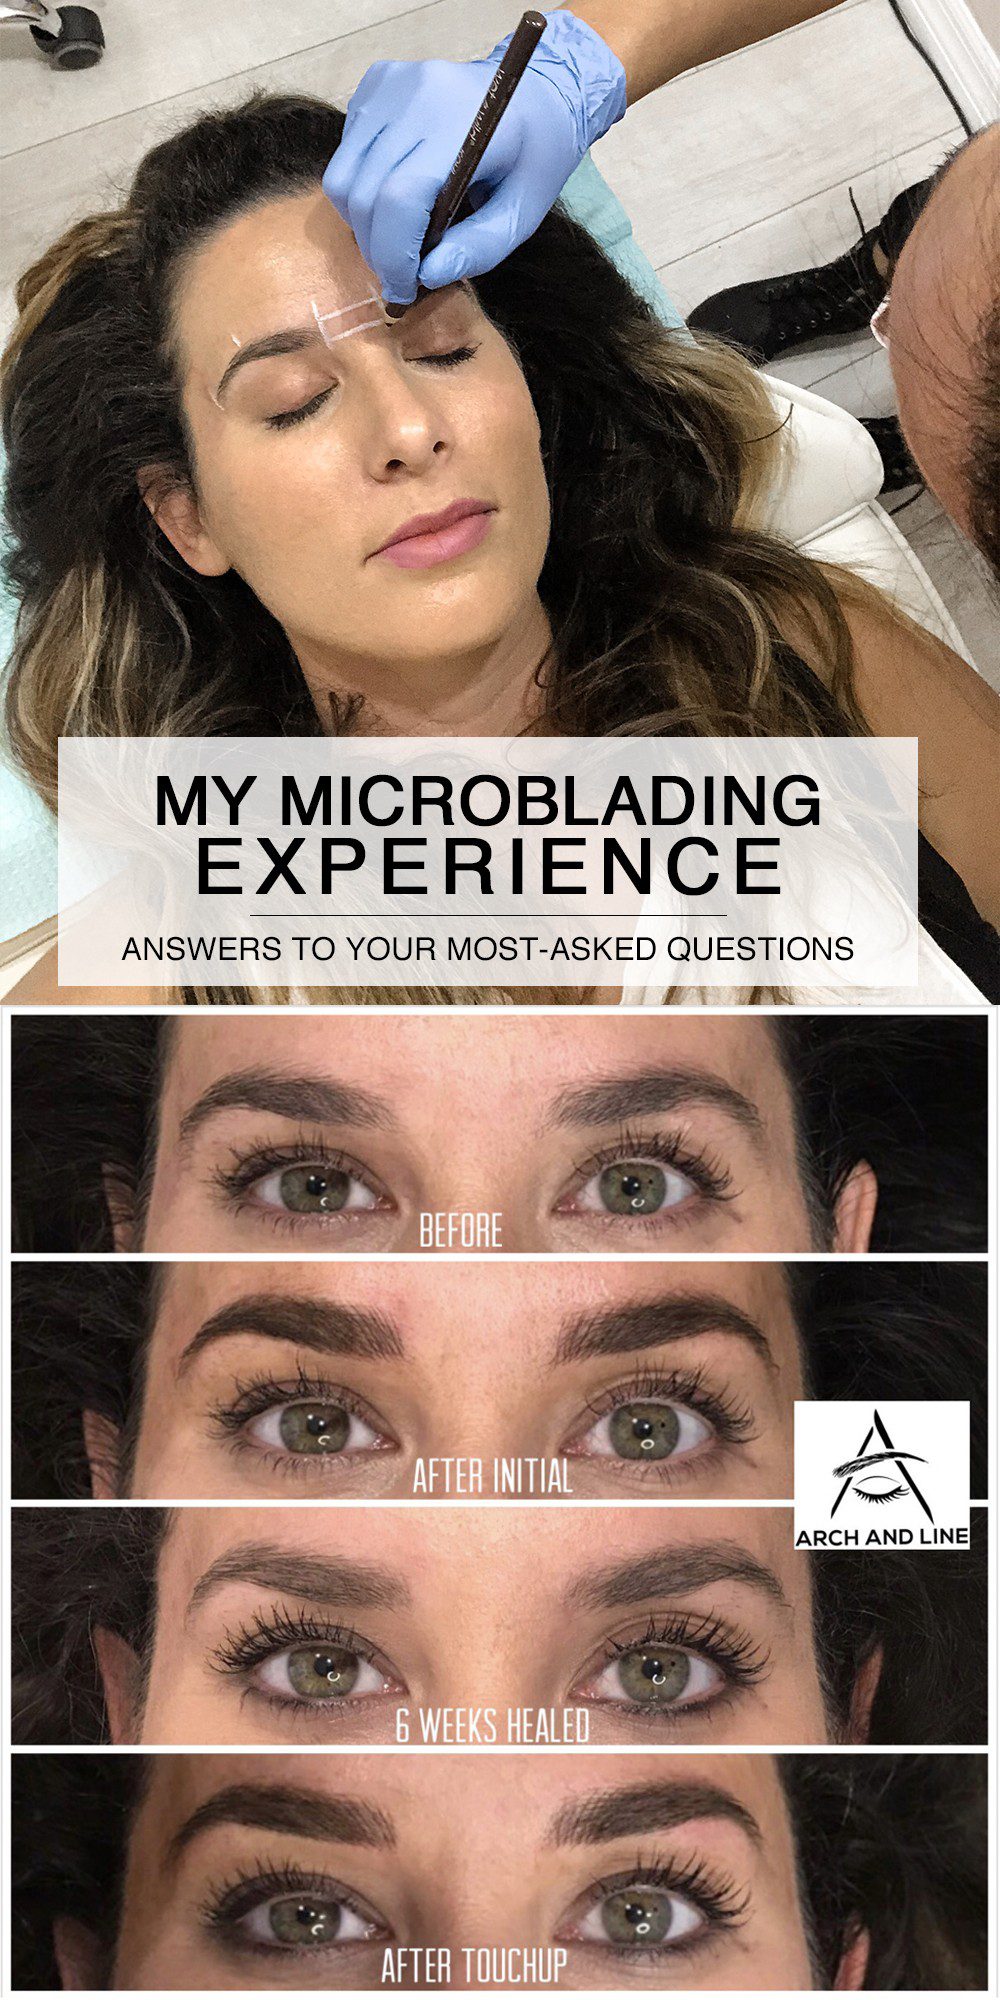 A step by step microblading guide through my own microblading experience, before and after pictures, and FAQ to help you on your own microblading journey!